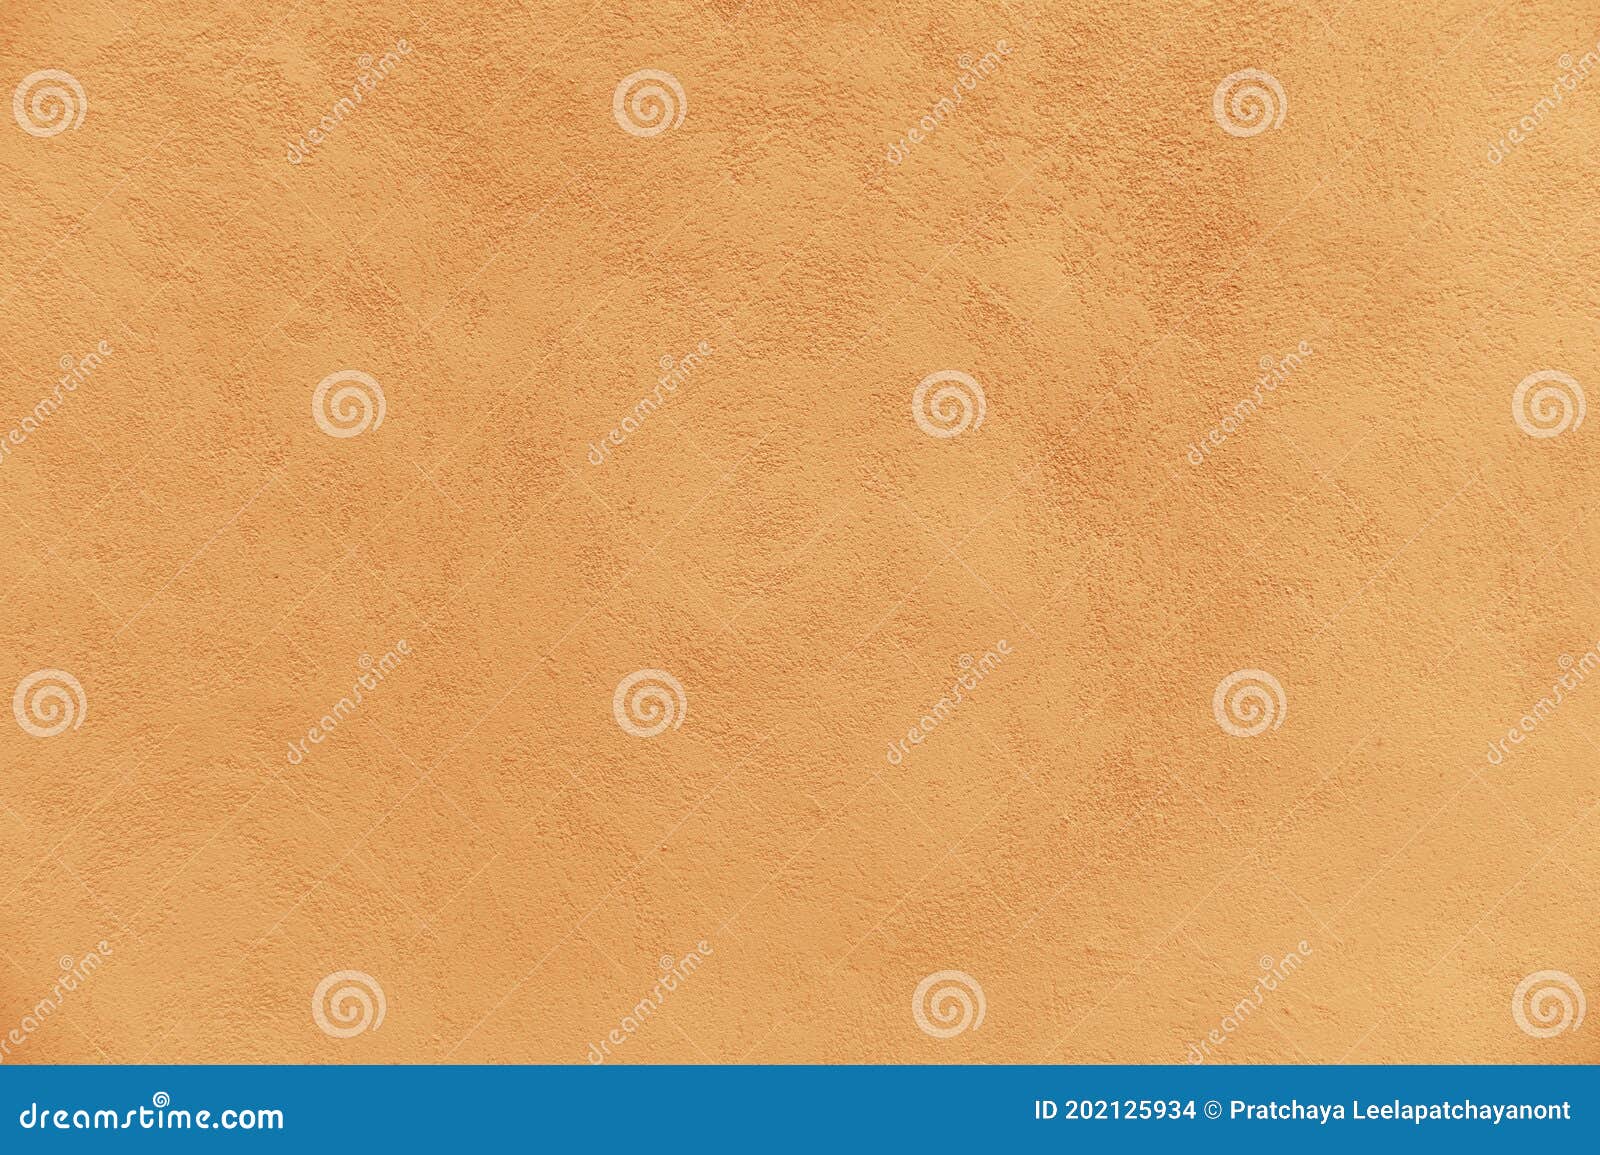 blank cement plaster wall orange colour. concrete wall texture for background